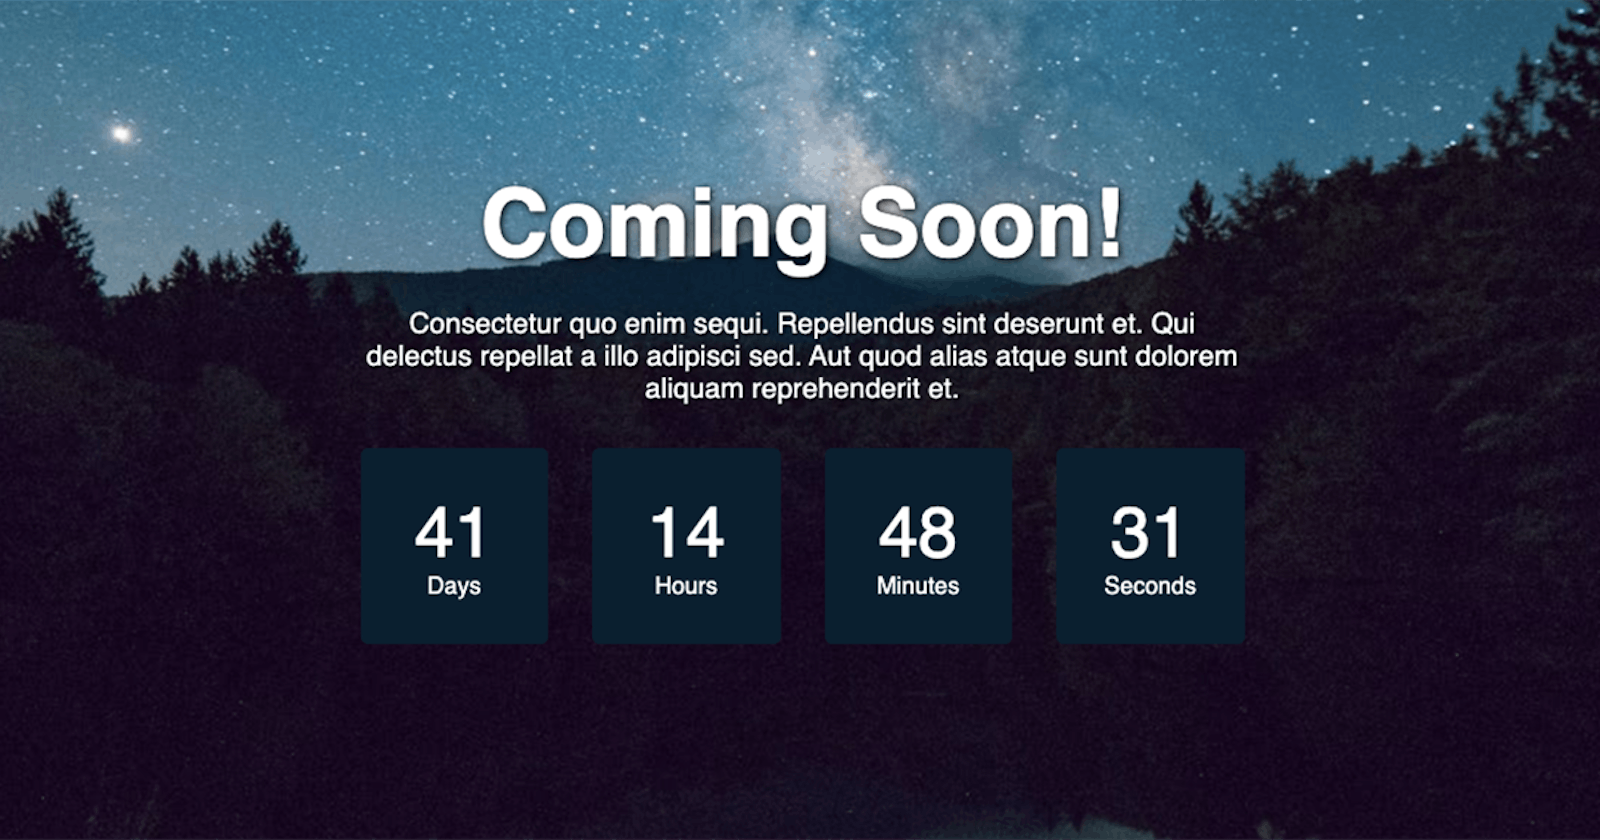 Create a coming soon page featuring a JavaScript countdown timer